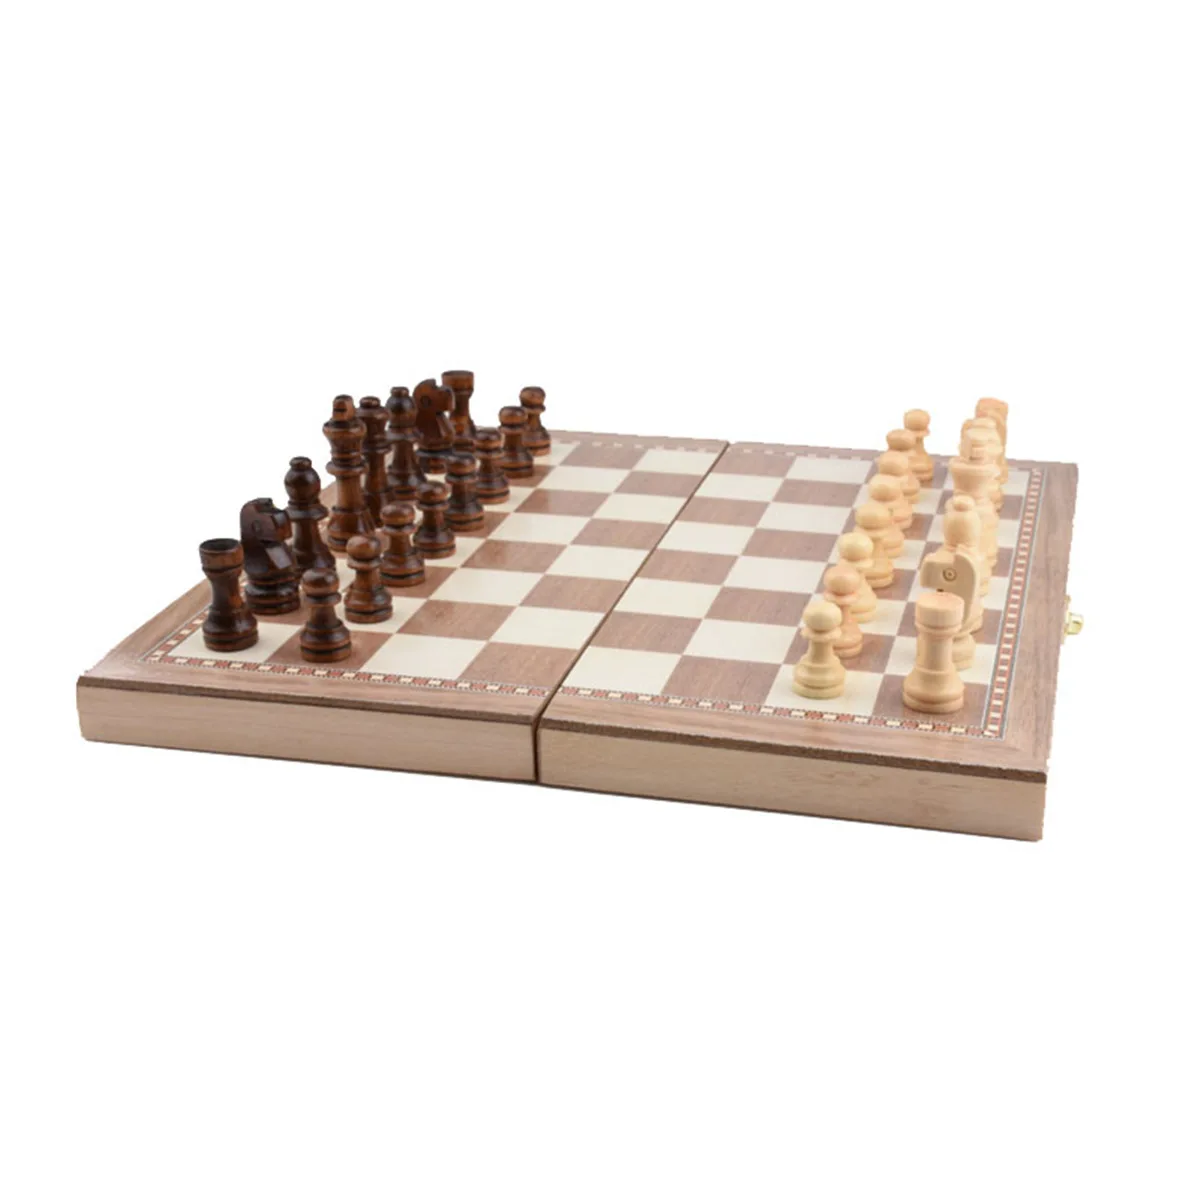 

2022 Board game Chess Pieces wooden magnetic chess set luxury wooden Chessboard game chess, Brown